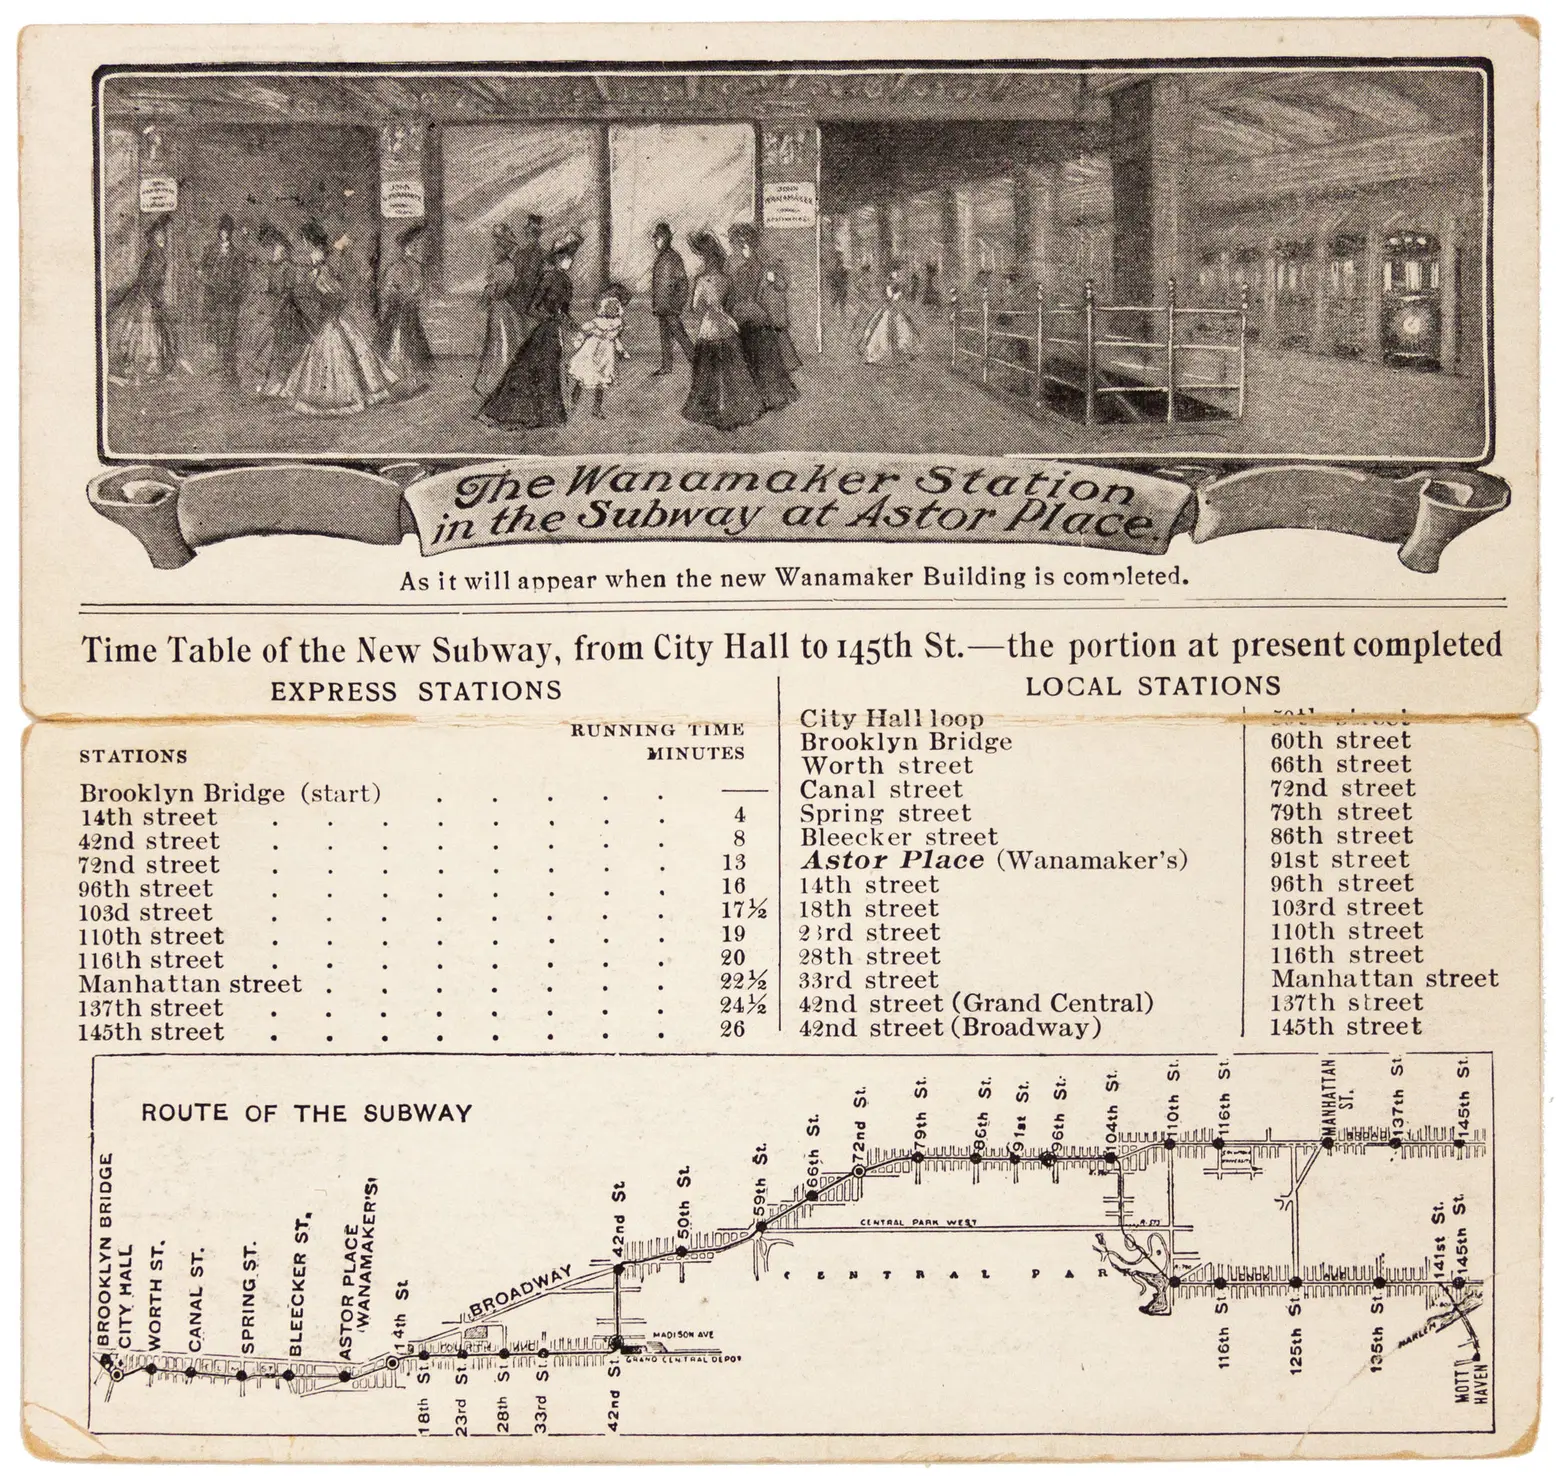 You can buy the earliest ‘portable’ NYC subway map for $12,000